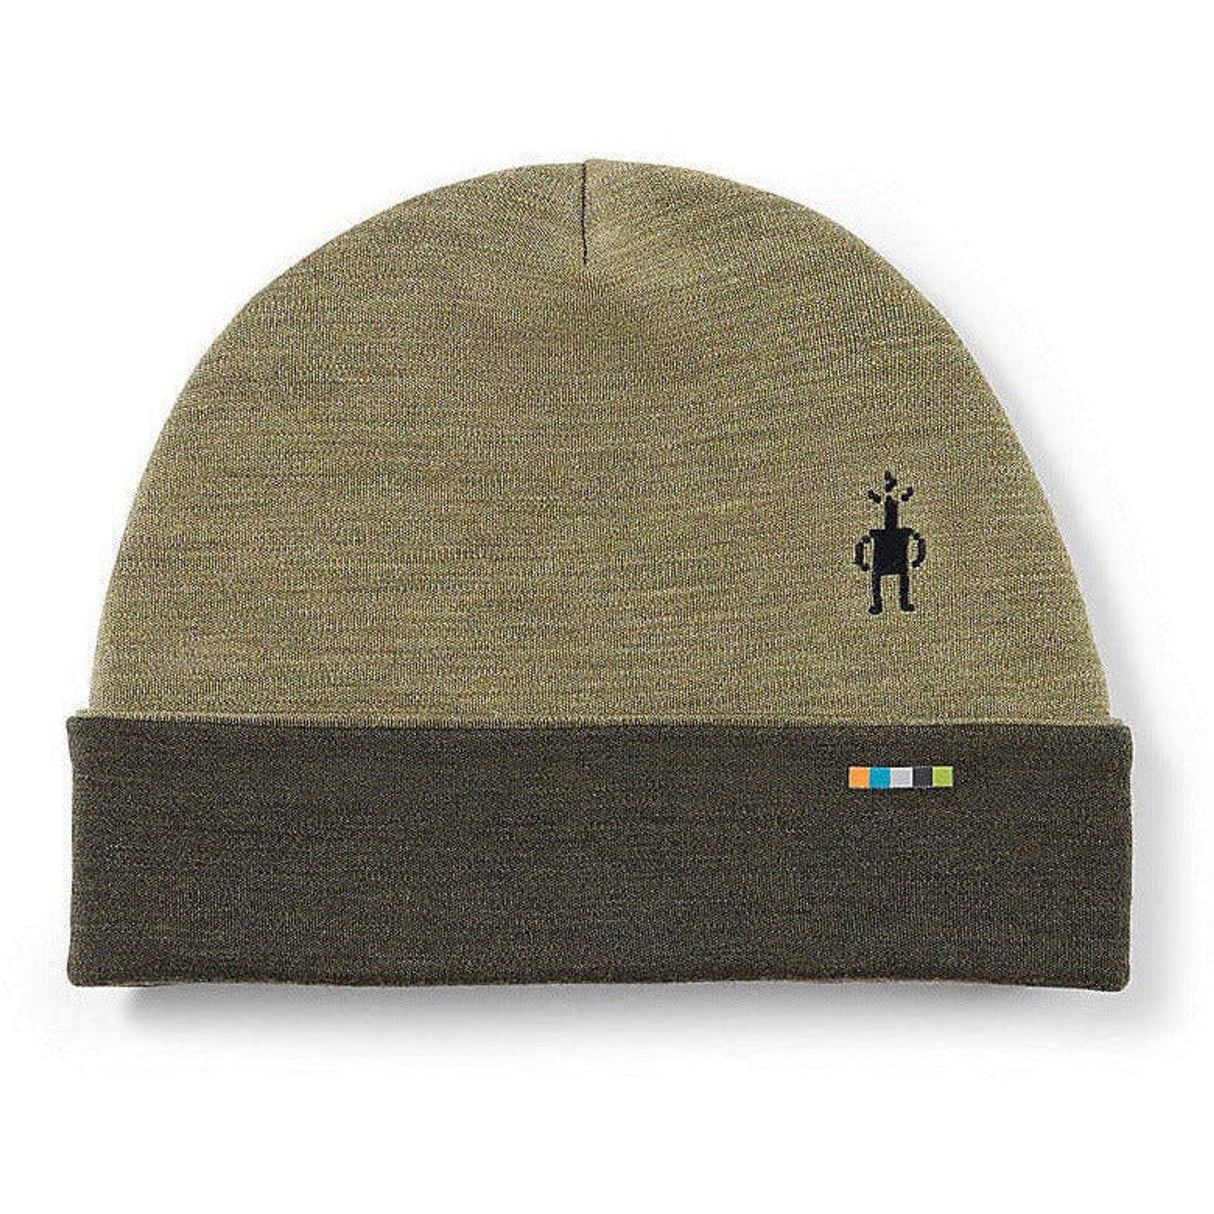 Smartwool Thermal Merino Reversible Cuffed Beanie  -  One Size Fits Most / Winter Moss Heather